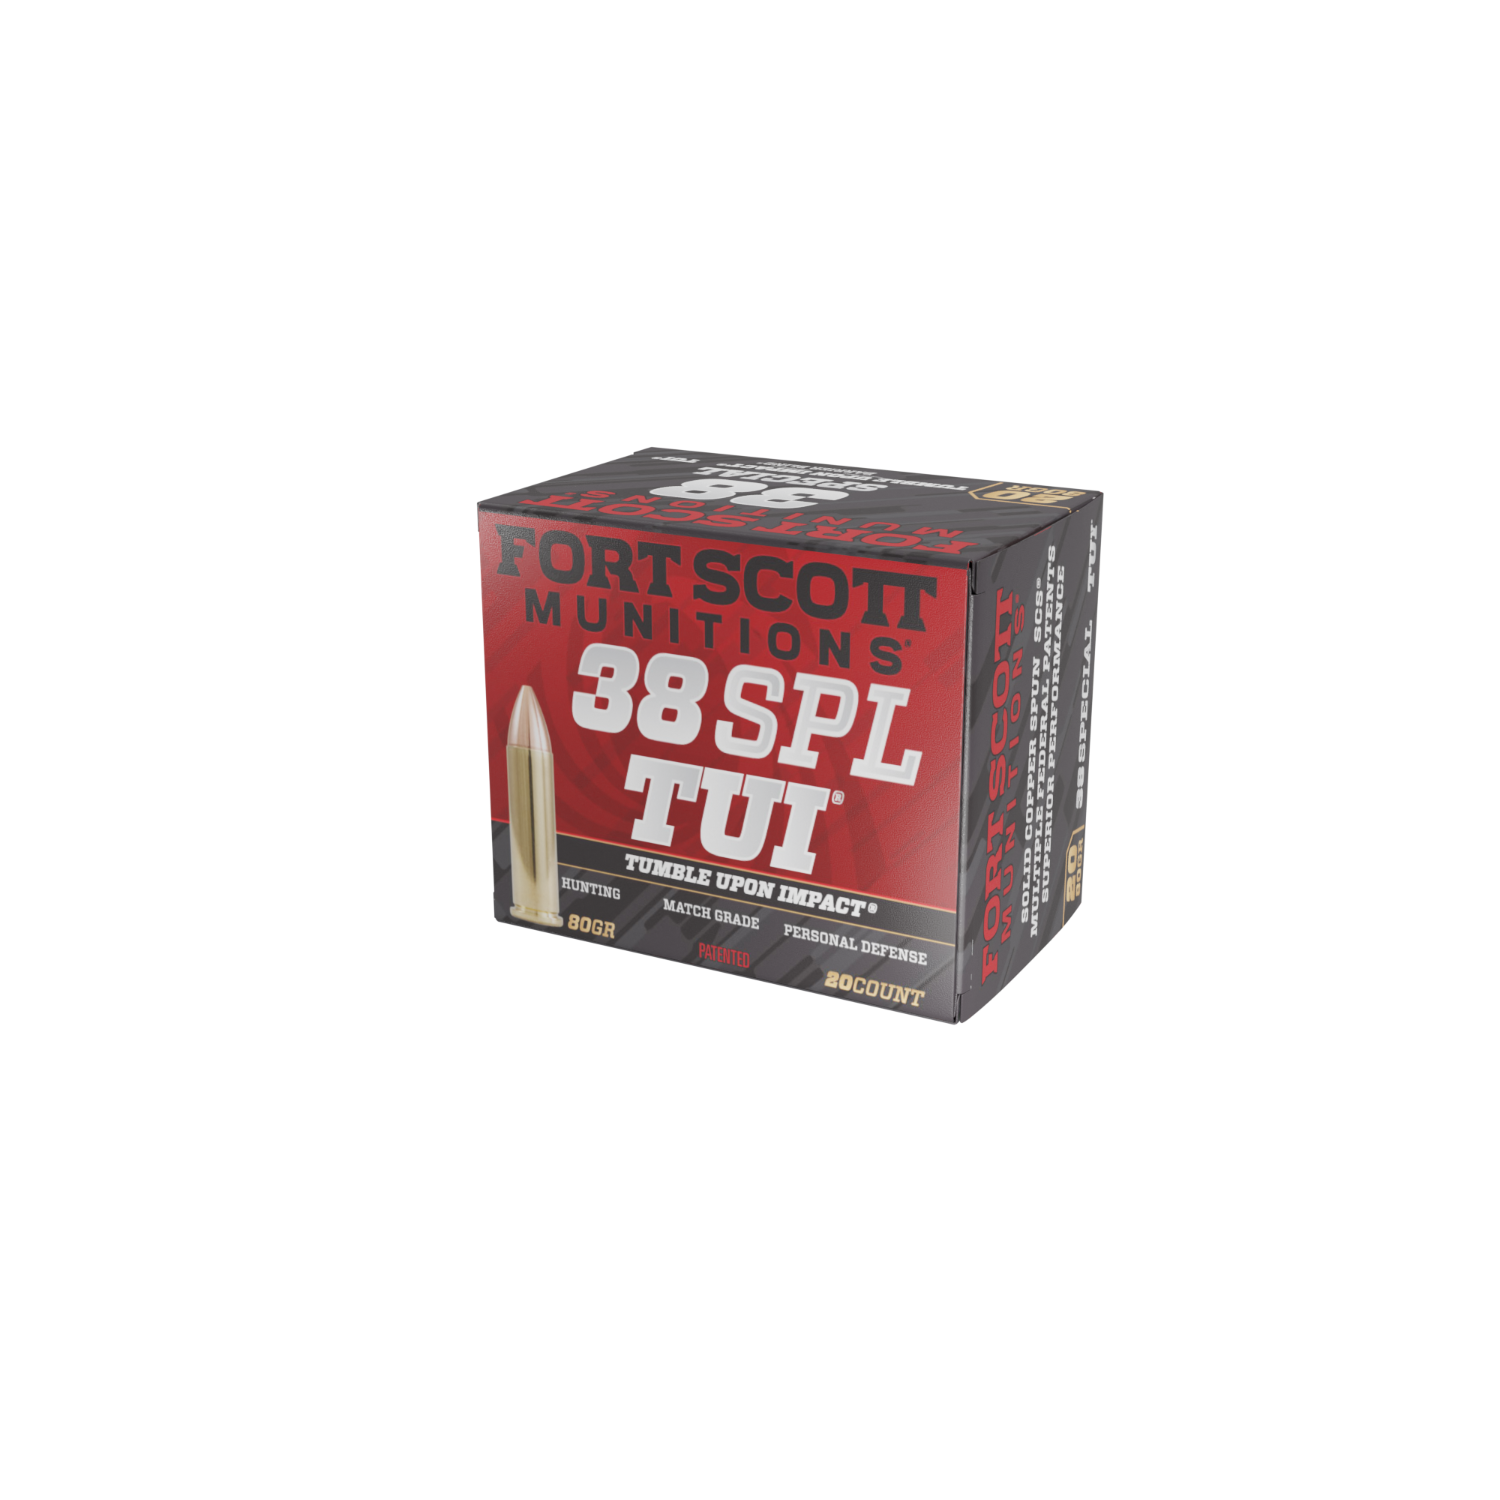 Fort Scott 38 Special TUI - 80Gr Ammo, 20 Count, .38 Special